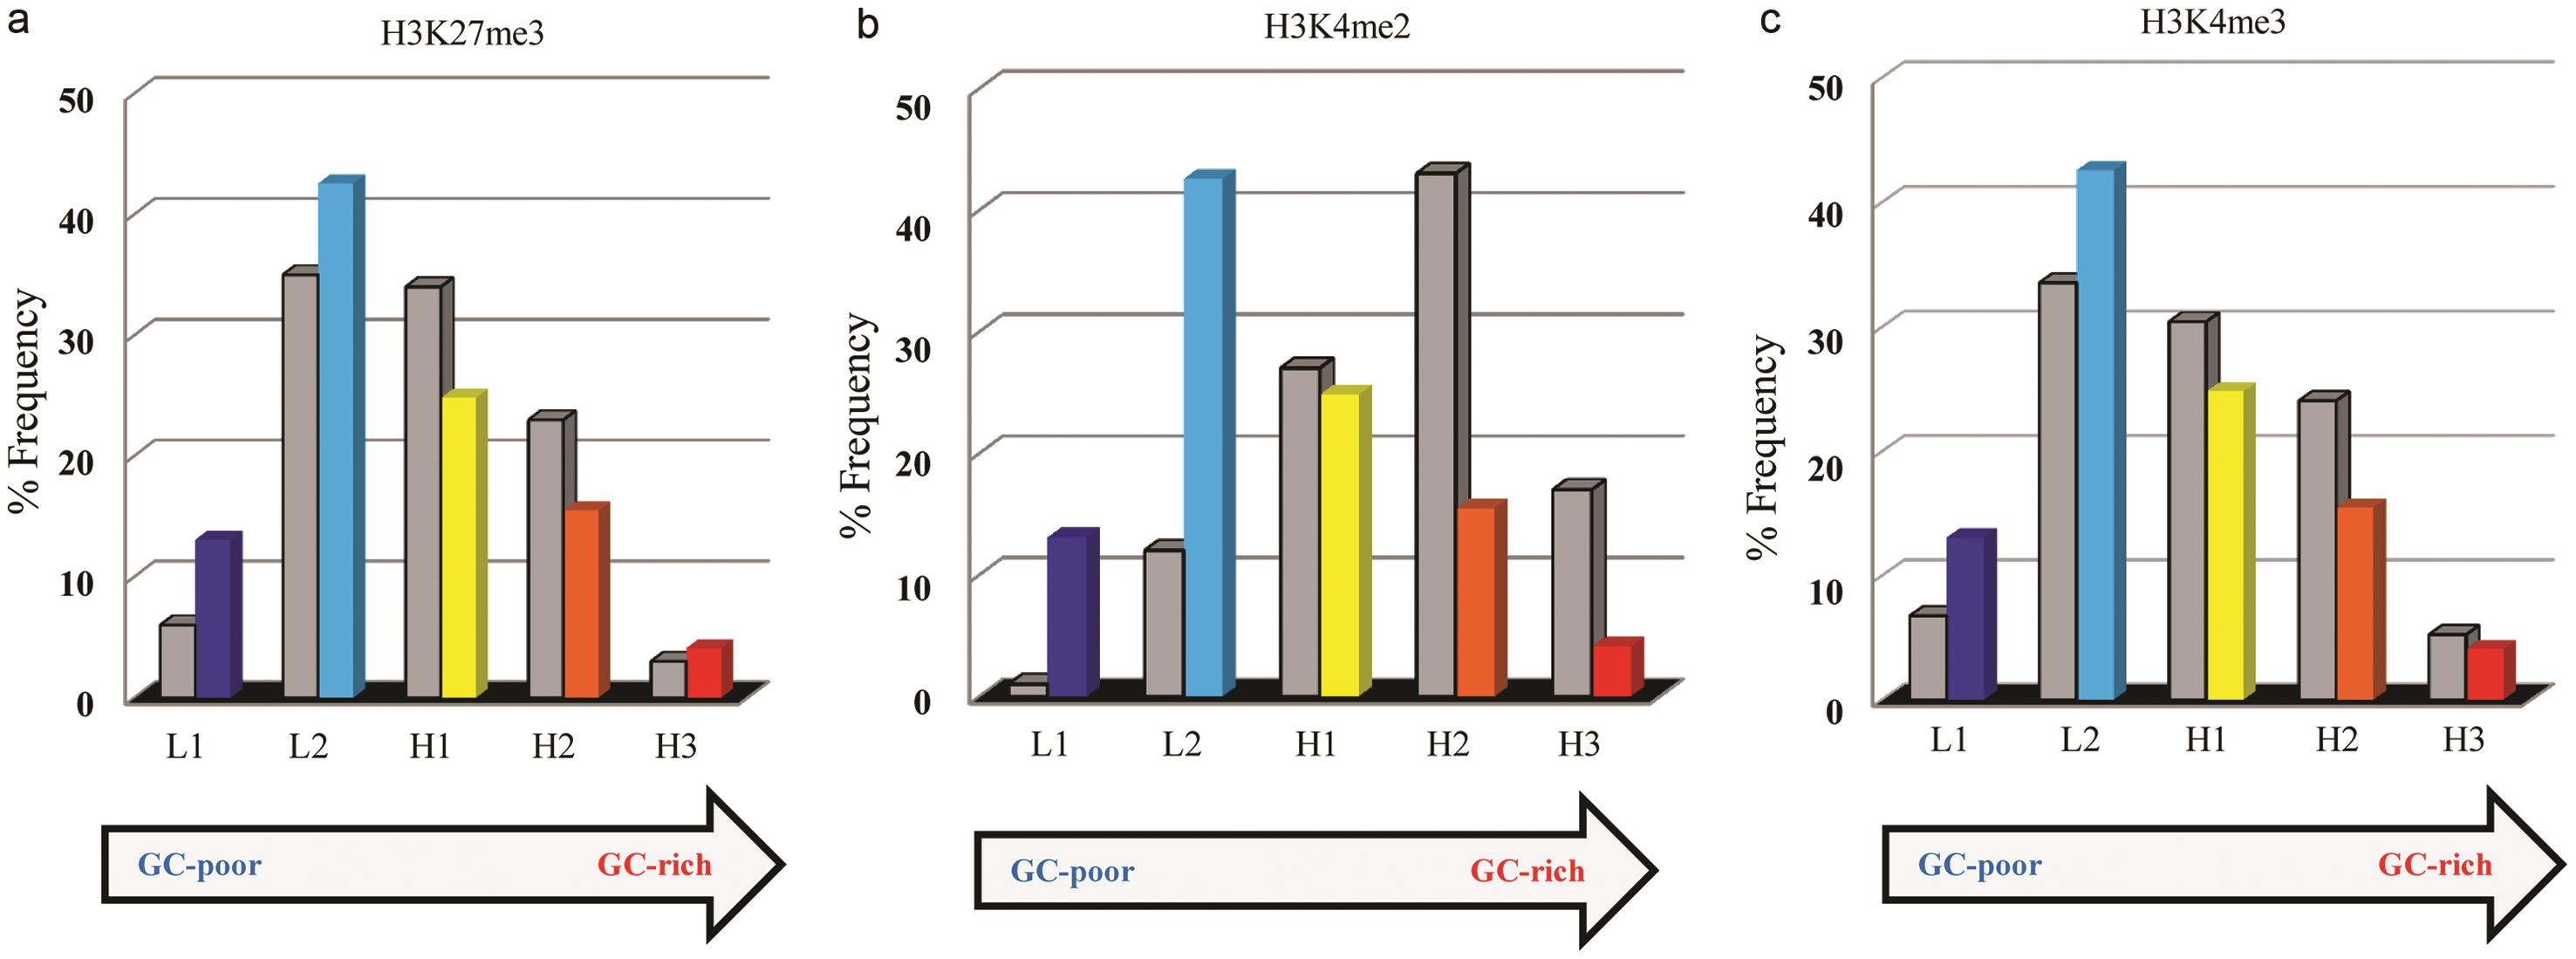 Distribution of genes carrying histone modifications across human isochore families.